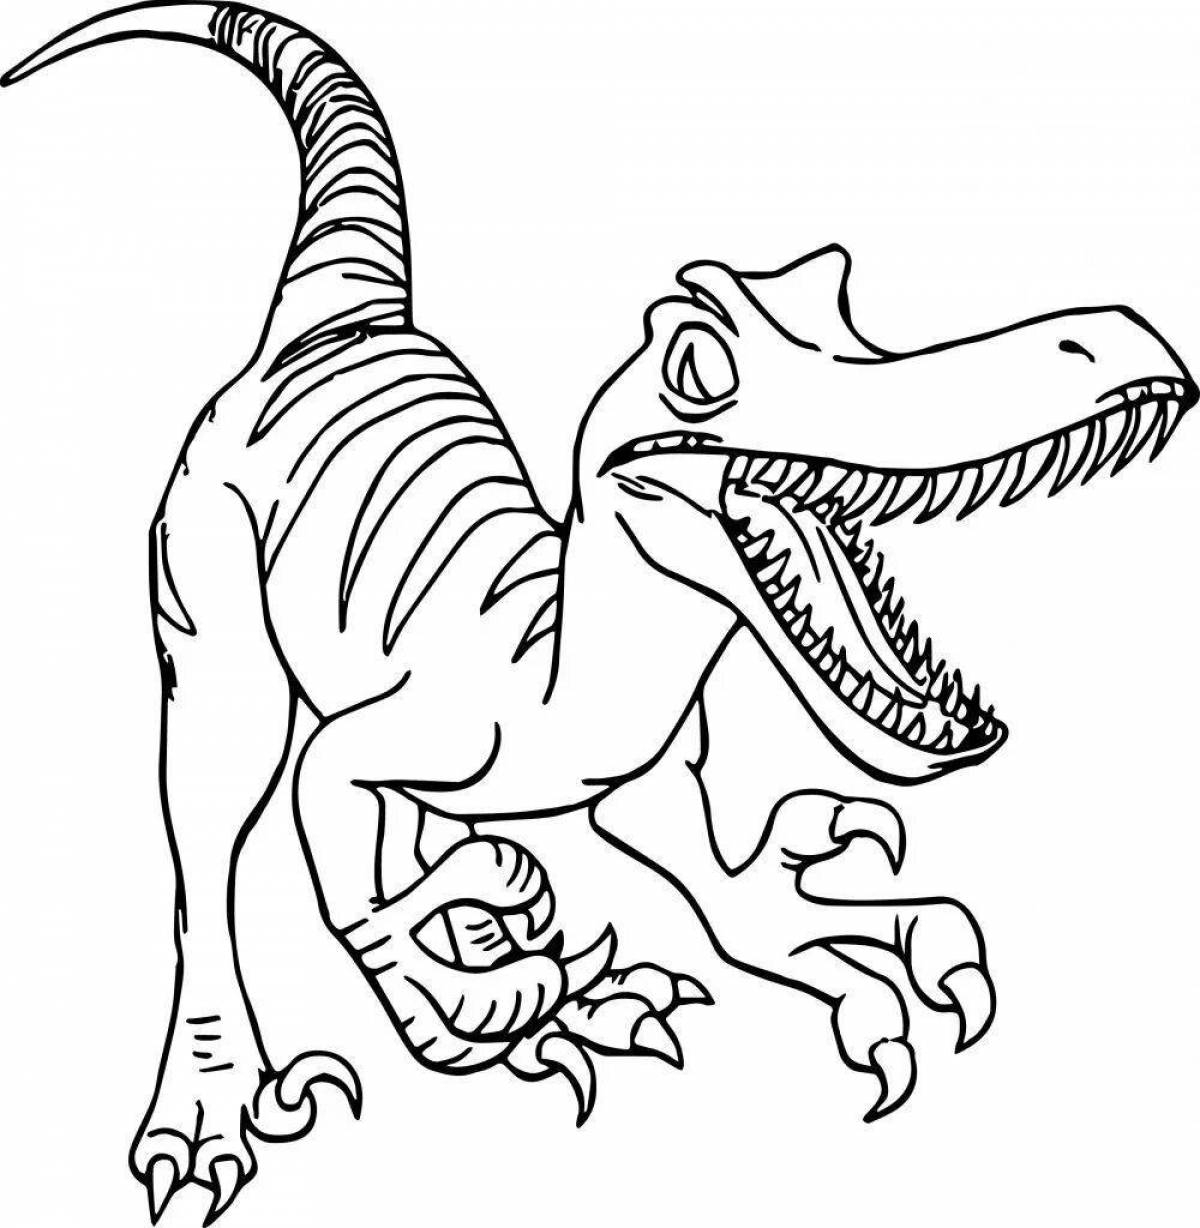 Intriguing dinosaur drawings to color in